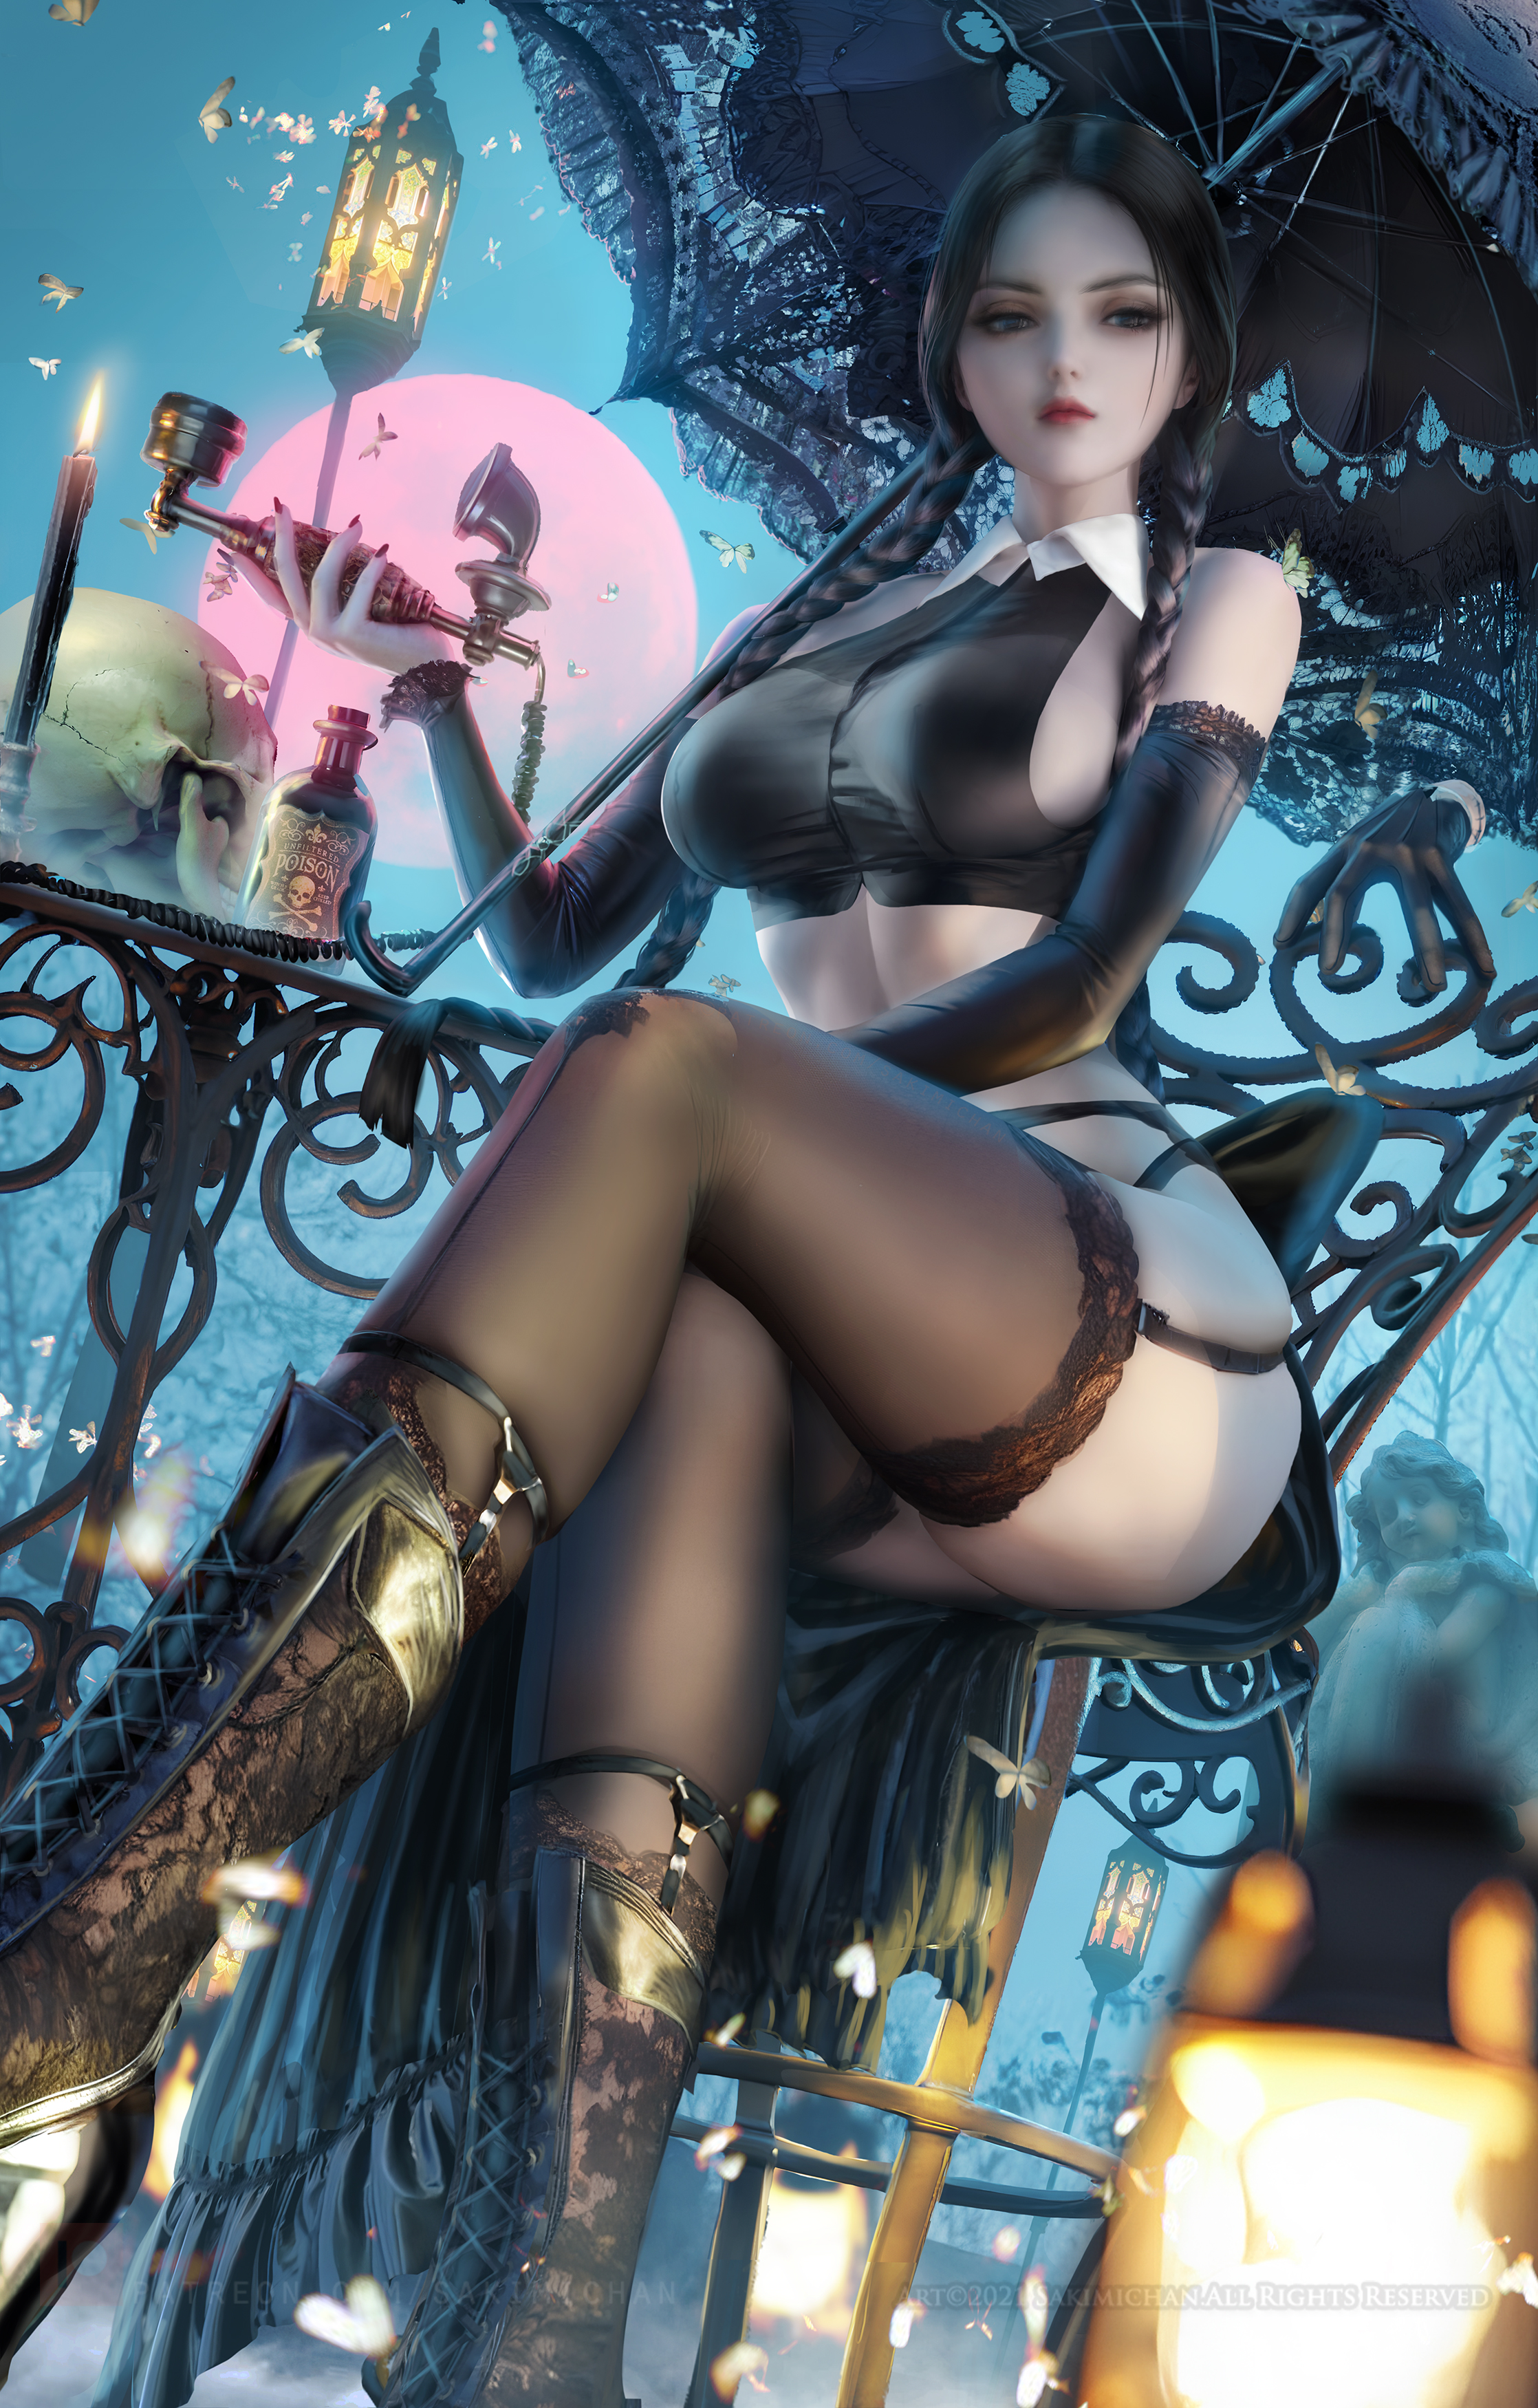 General 2236x3500 Wednesday Addams fictional character 2D artwork drawing fan art Sakimichan Gothic lingerie stockings candles skull